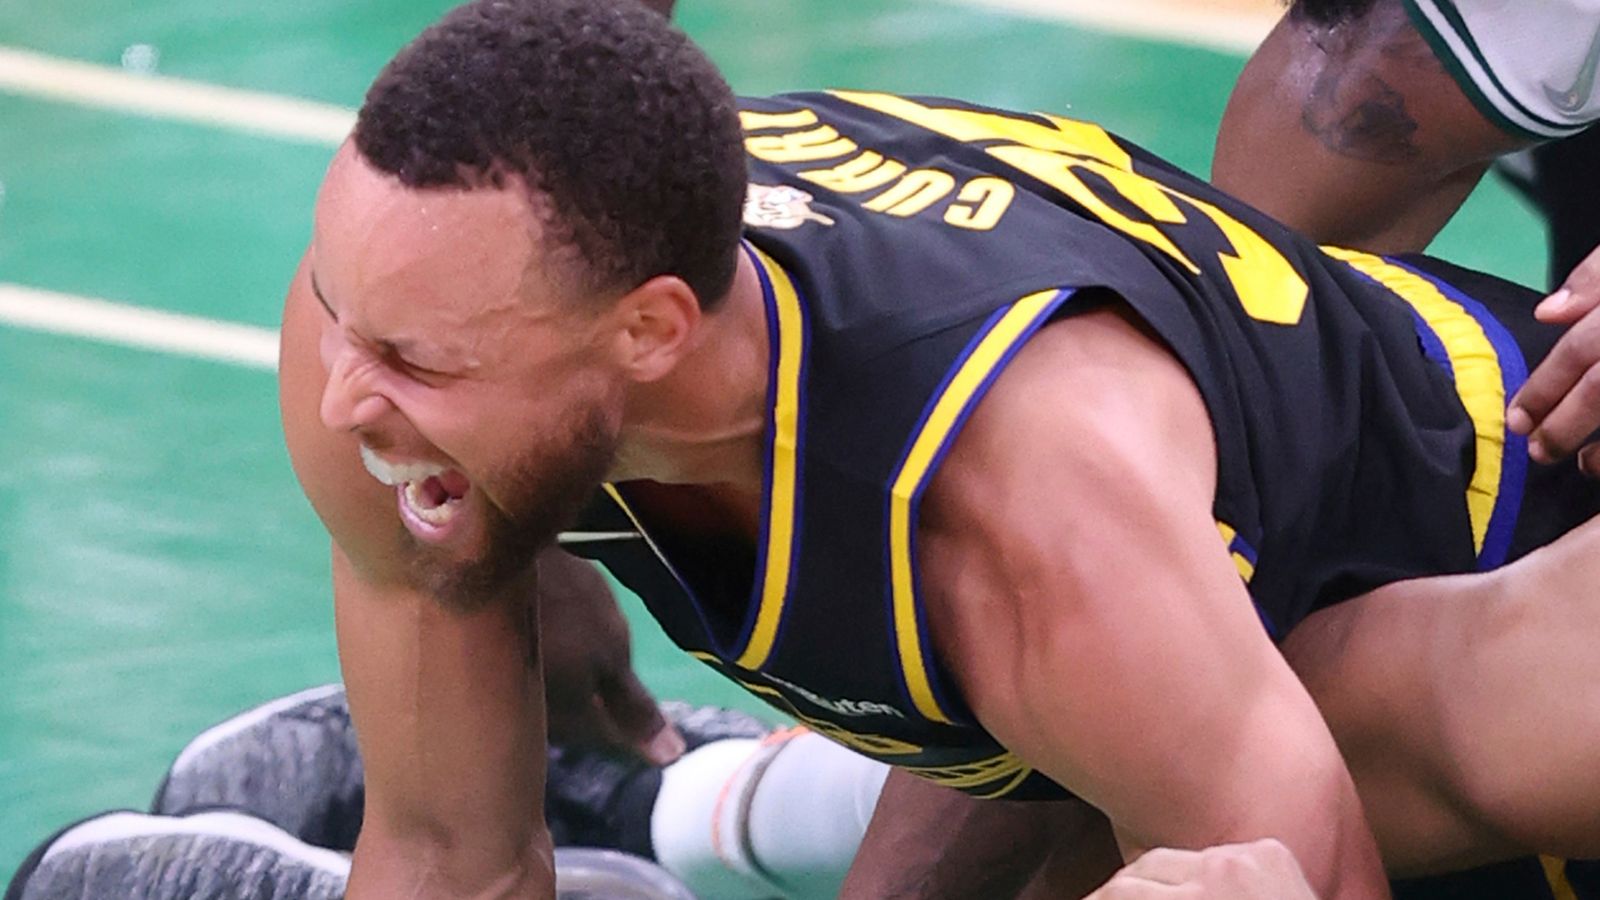 stephen-curry-suffers-injury-during-scrum-on-floor-in-fourth-quarter-of-game-3-of-nba-finals